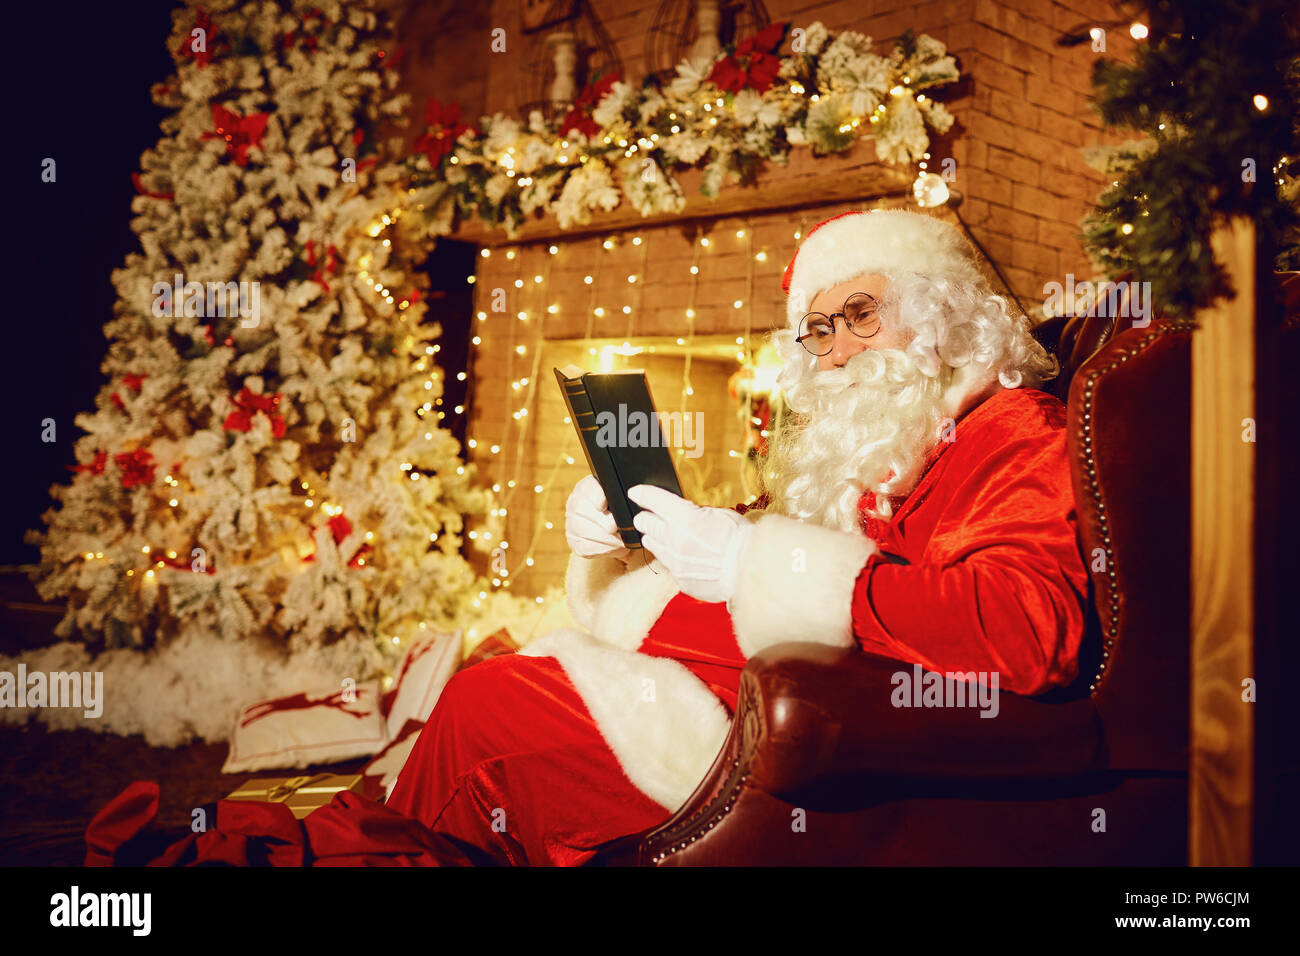 Santa Claus is reading a book in a room with a fireplace in Chri Stock Photo